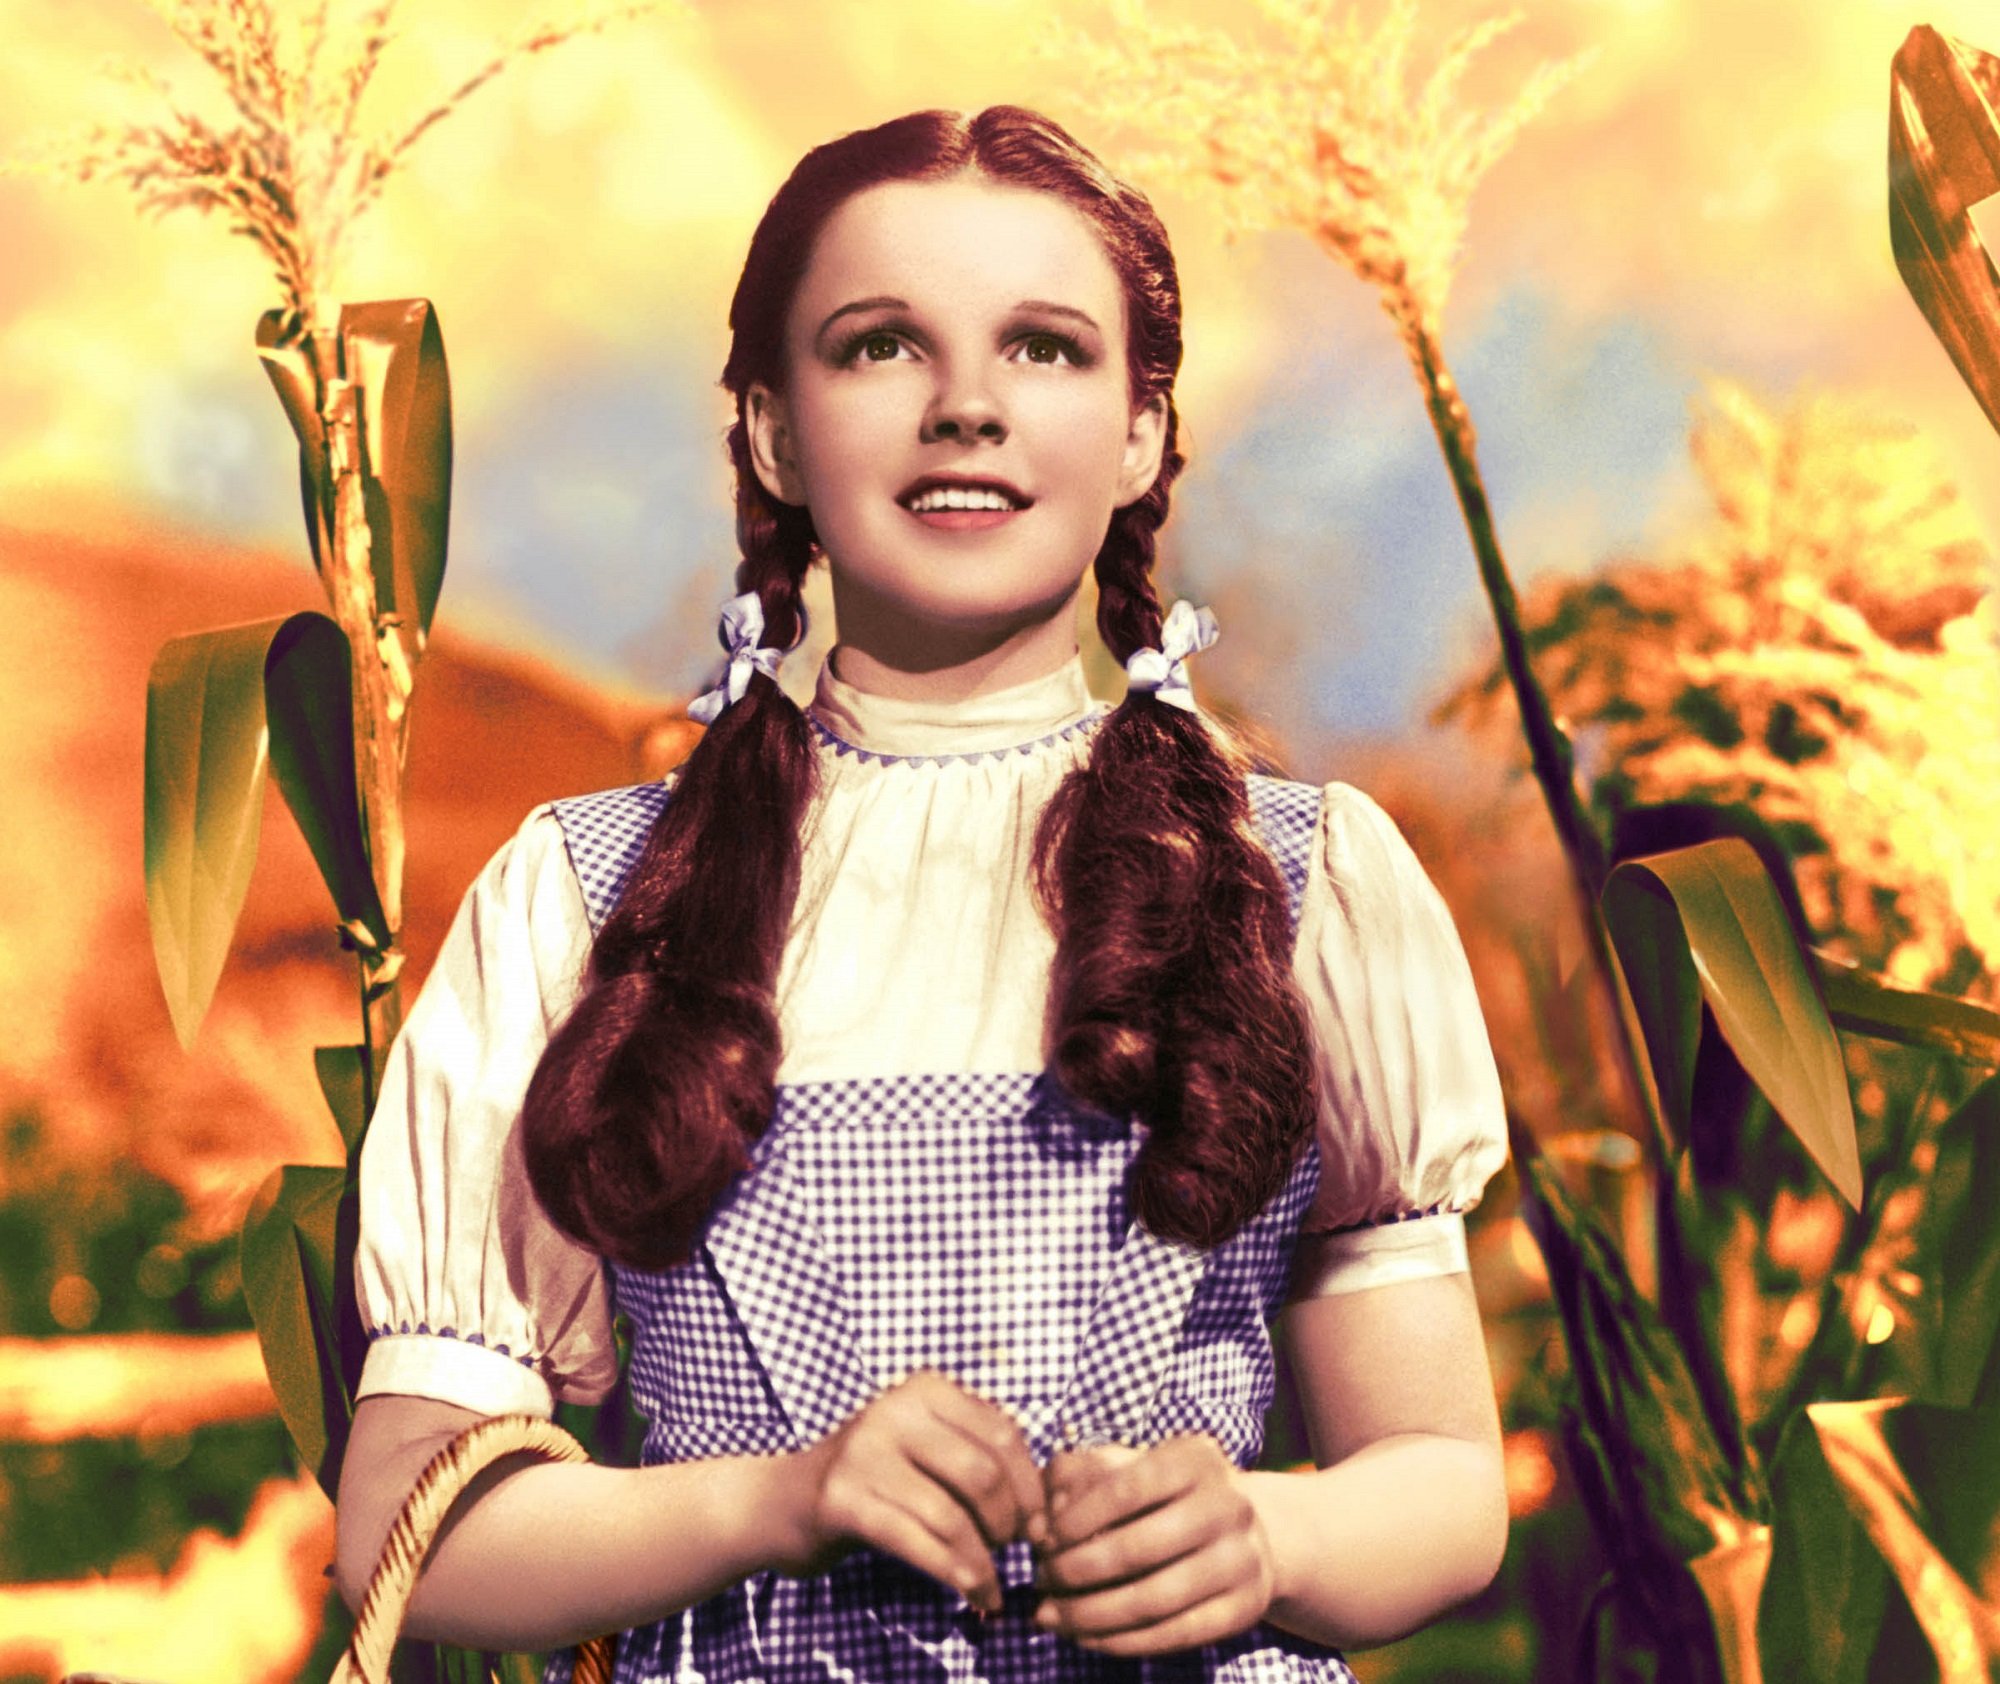 Judy Garland as Dorothy Gale in 'The Wizard of Oz', 1939.